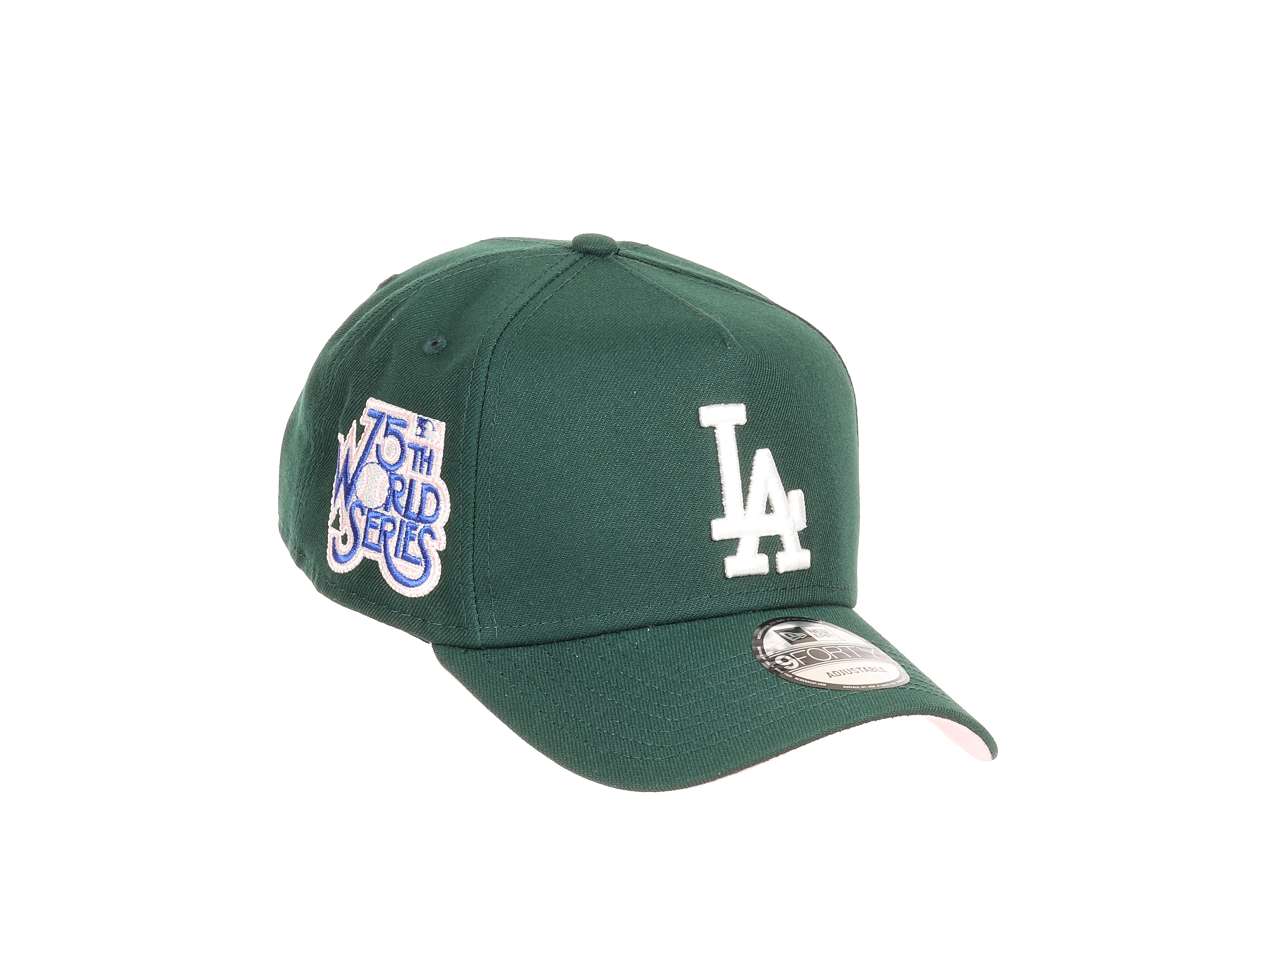 Los Angeles Dodgers MLB 75th World Series Sidepatch Dark Green 9Forty A-Frame Adjustable Cap New Era